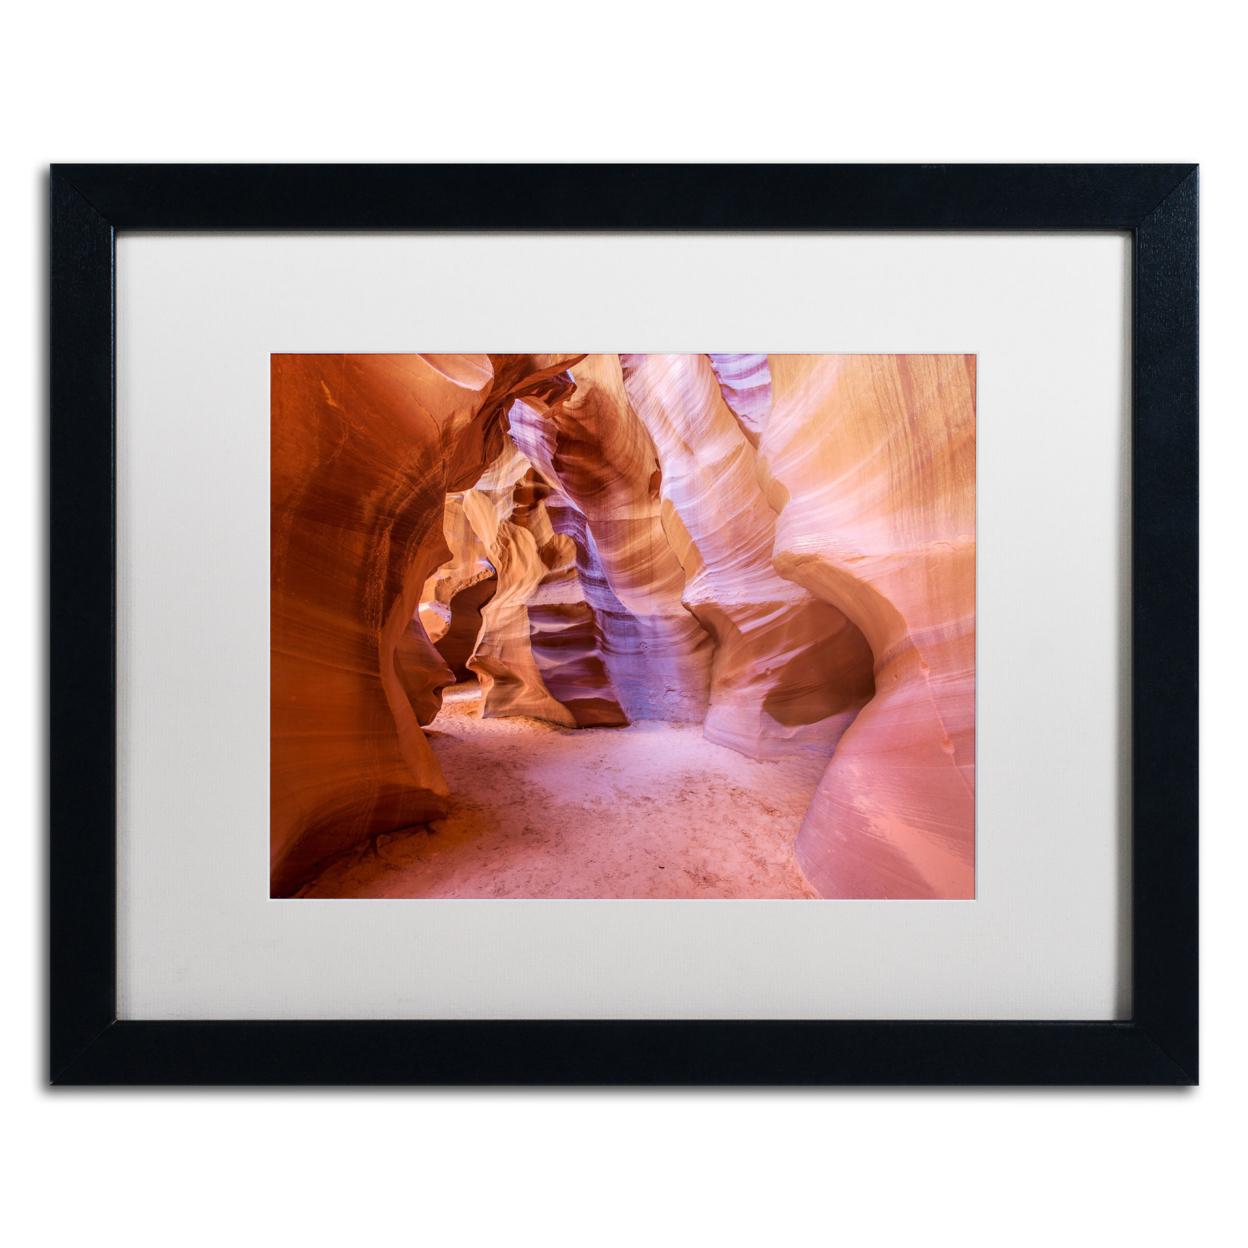 Pierre Leclerc 'Upper Antelope Canyon' Black Wooden Framed Art 18 X 22 Inches